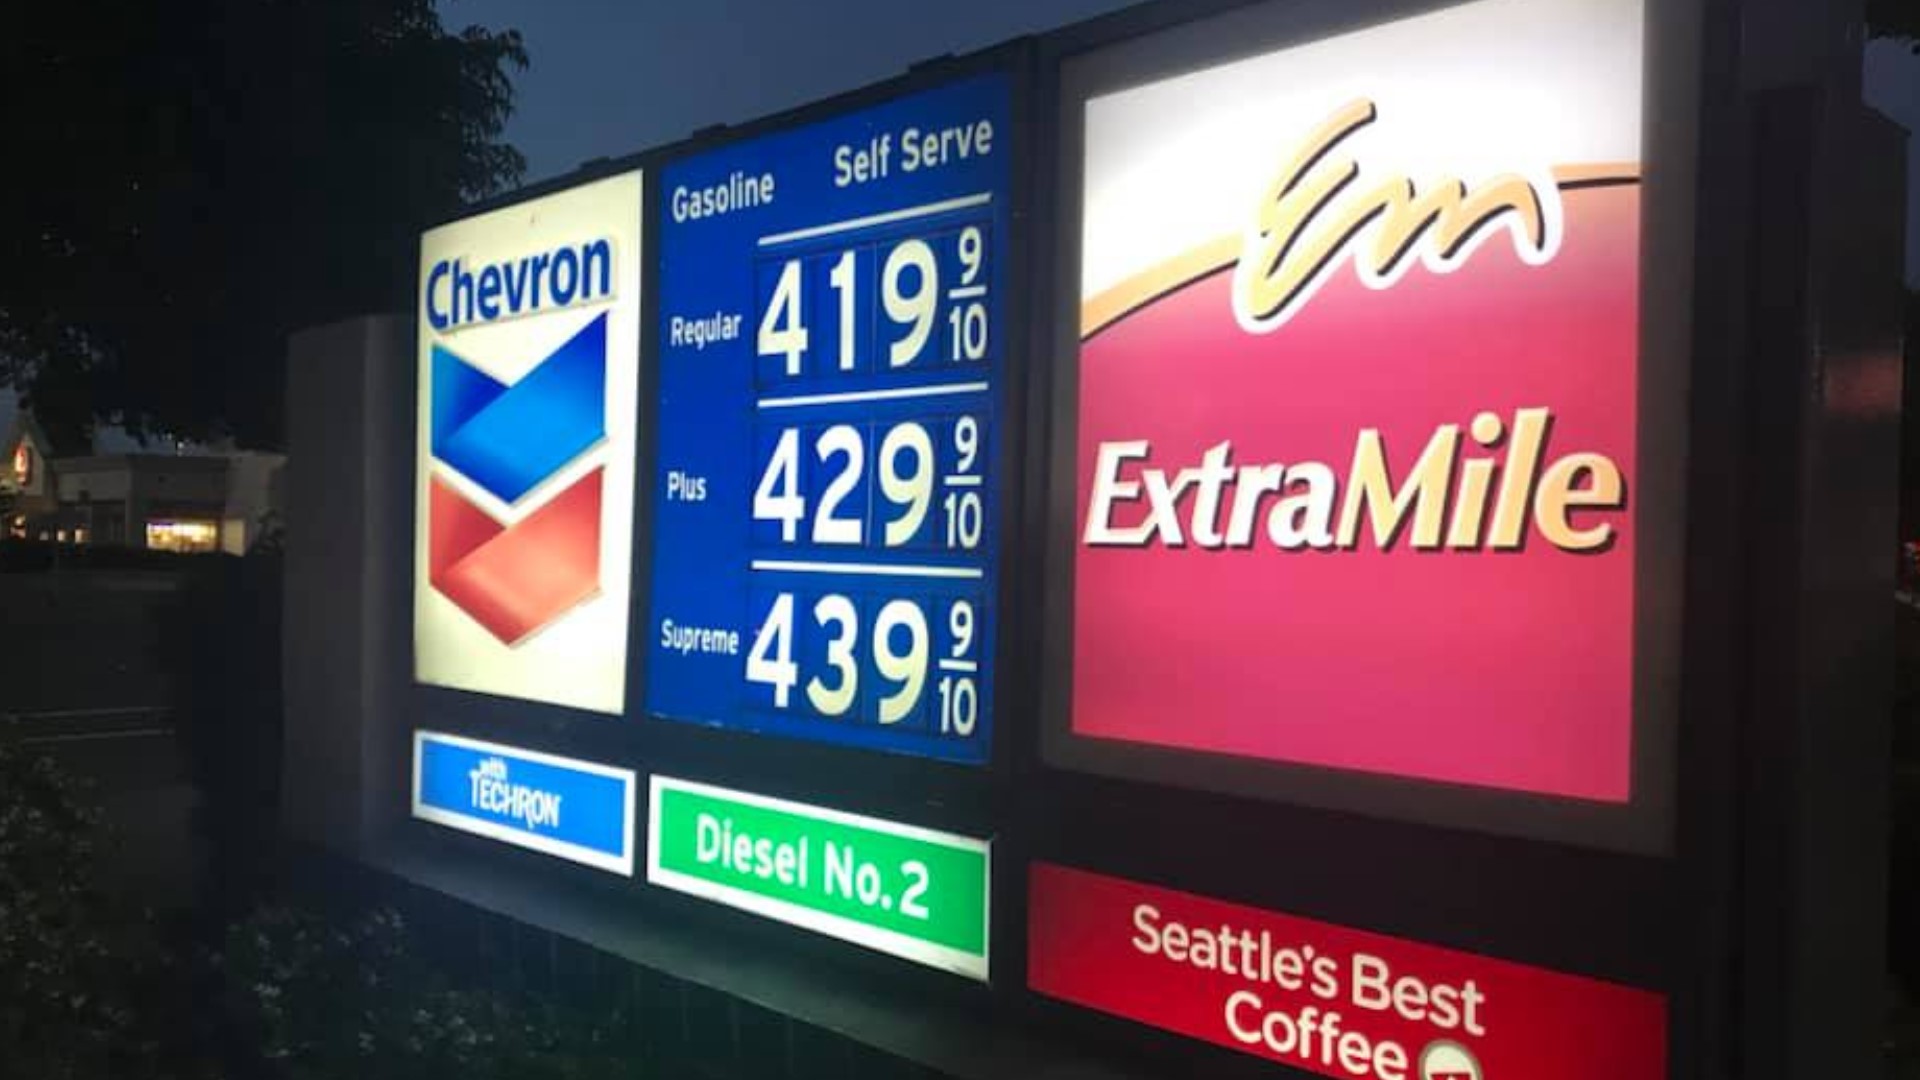 AAA said gas prices jumped by 32 cents in the past week, bringing the state average in California up to $4.10 per gallon.